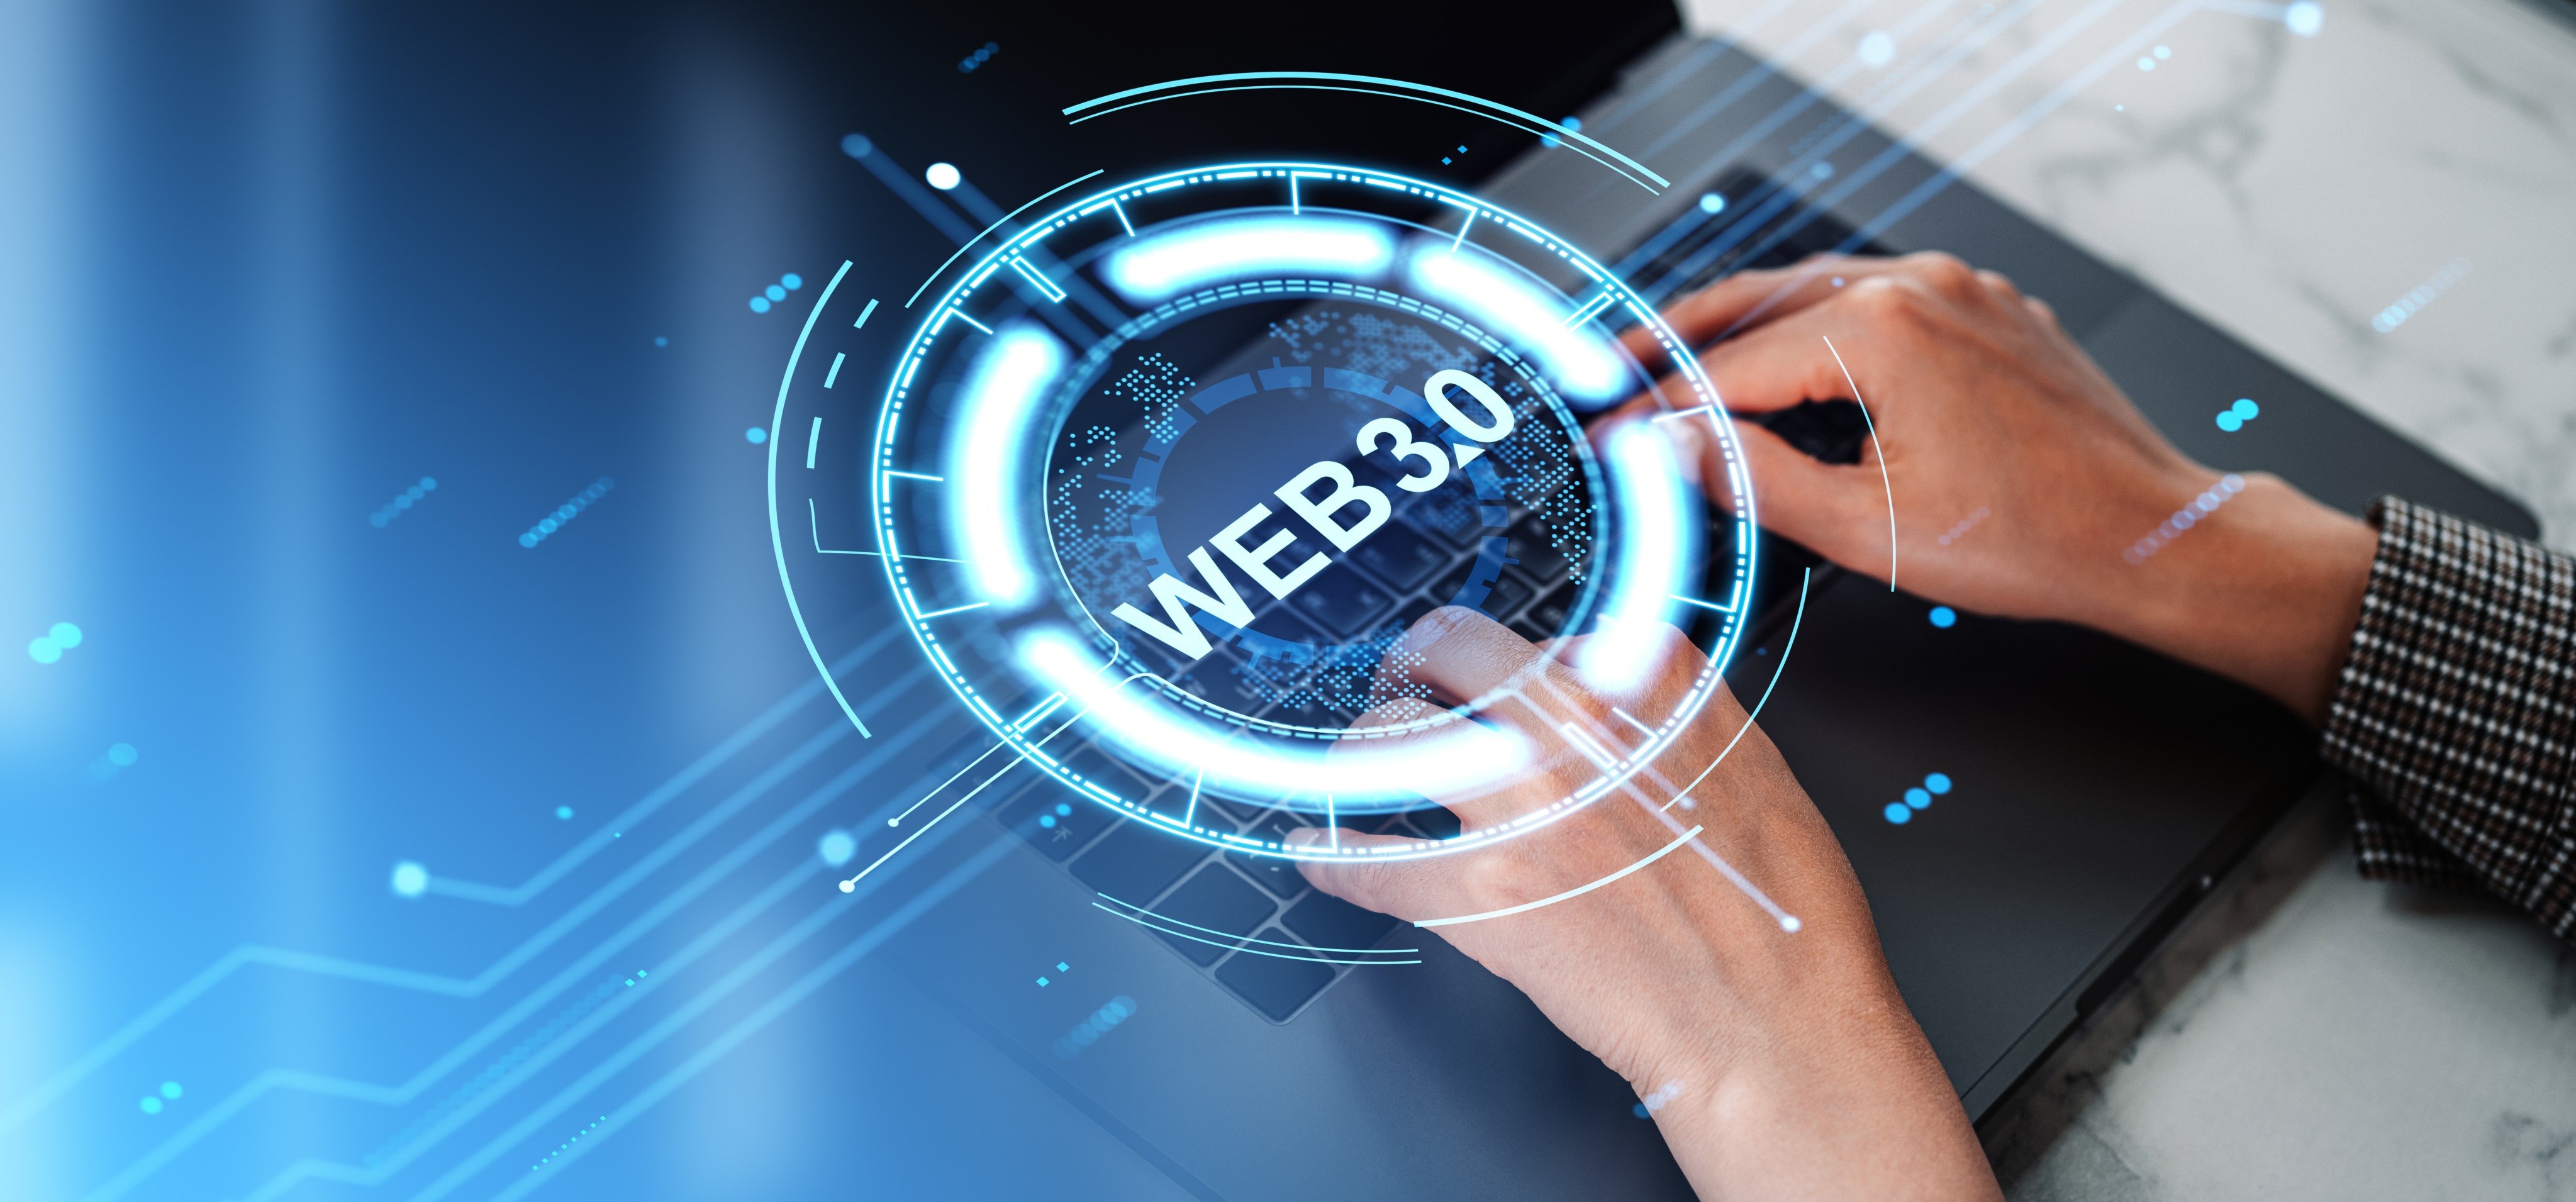 The Ministry of Industry and Information Technology’s proposed plan would represent China’s first national-level Web3 policy. Image: Shutterstock